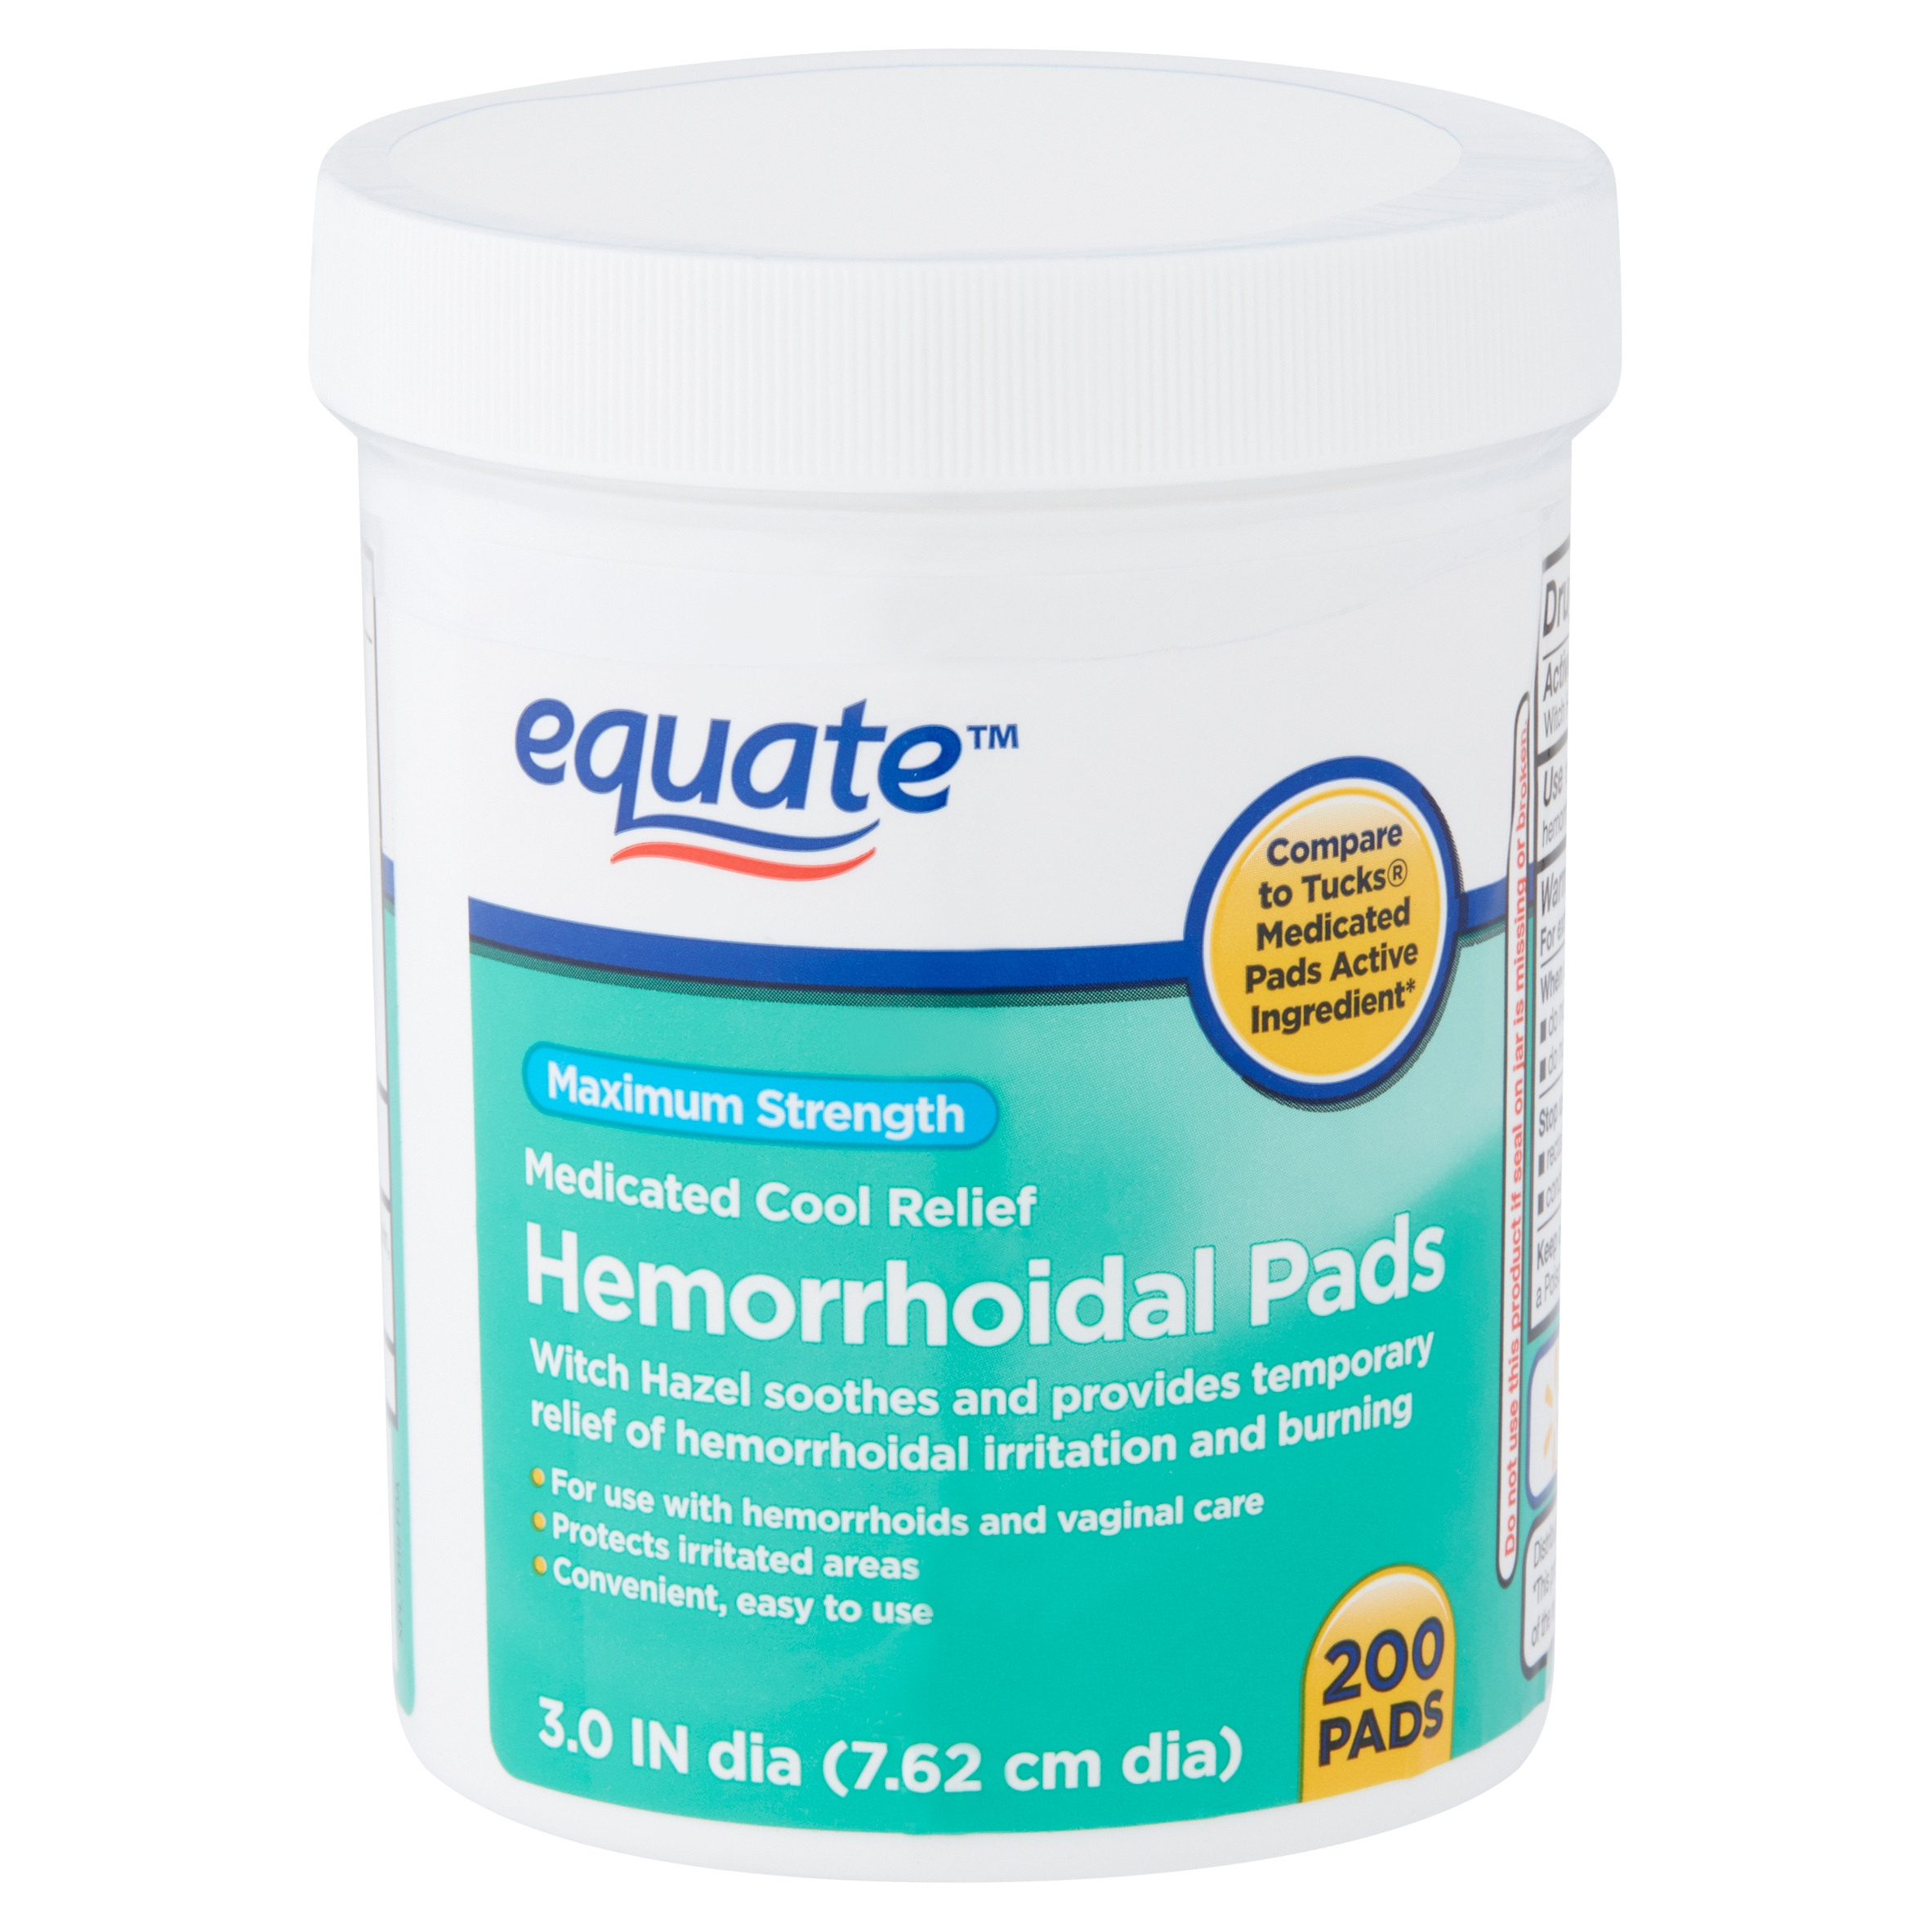 Equate Maximum Strength Medicated Cool Relief Hemorrhoidal Pads 200 Count Crowdedline Delivery 